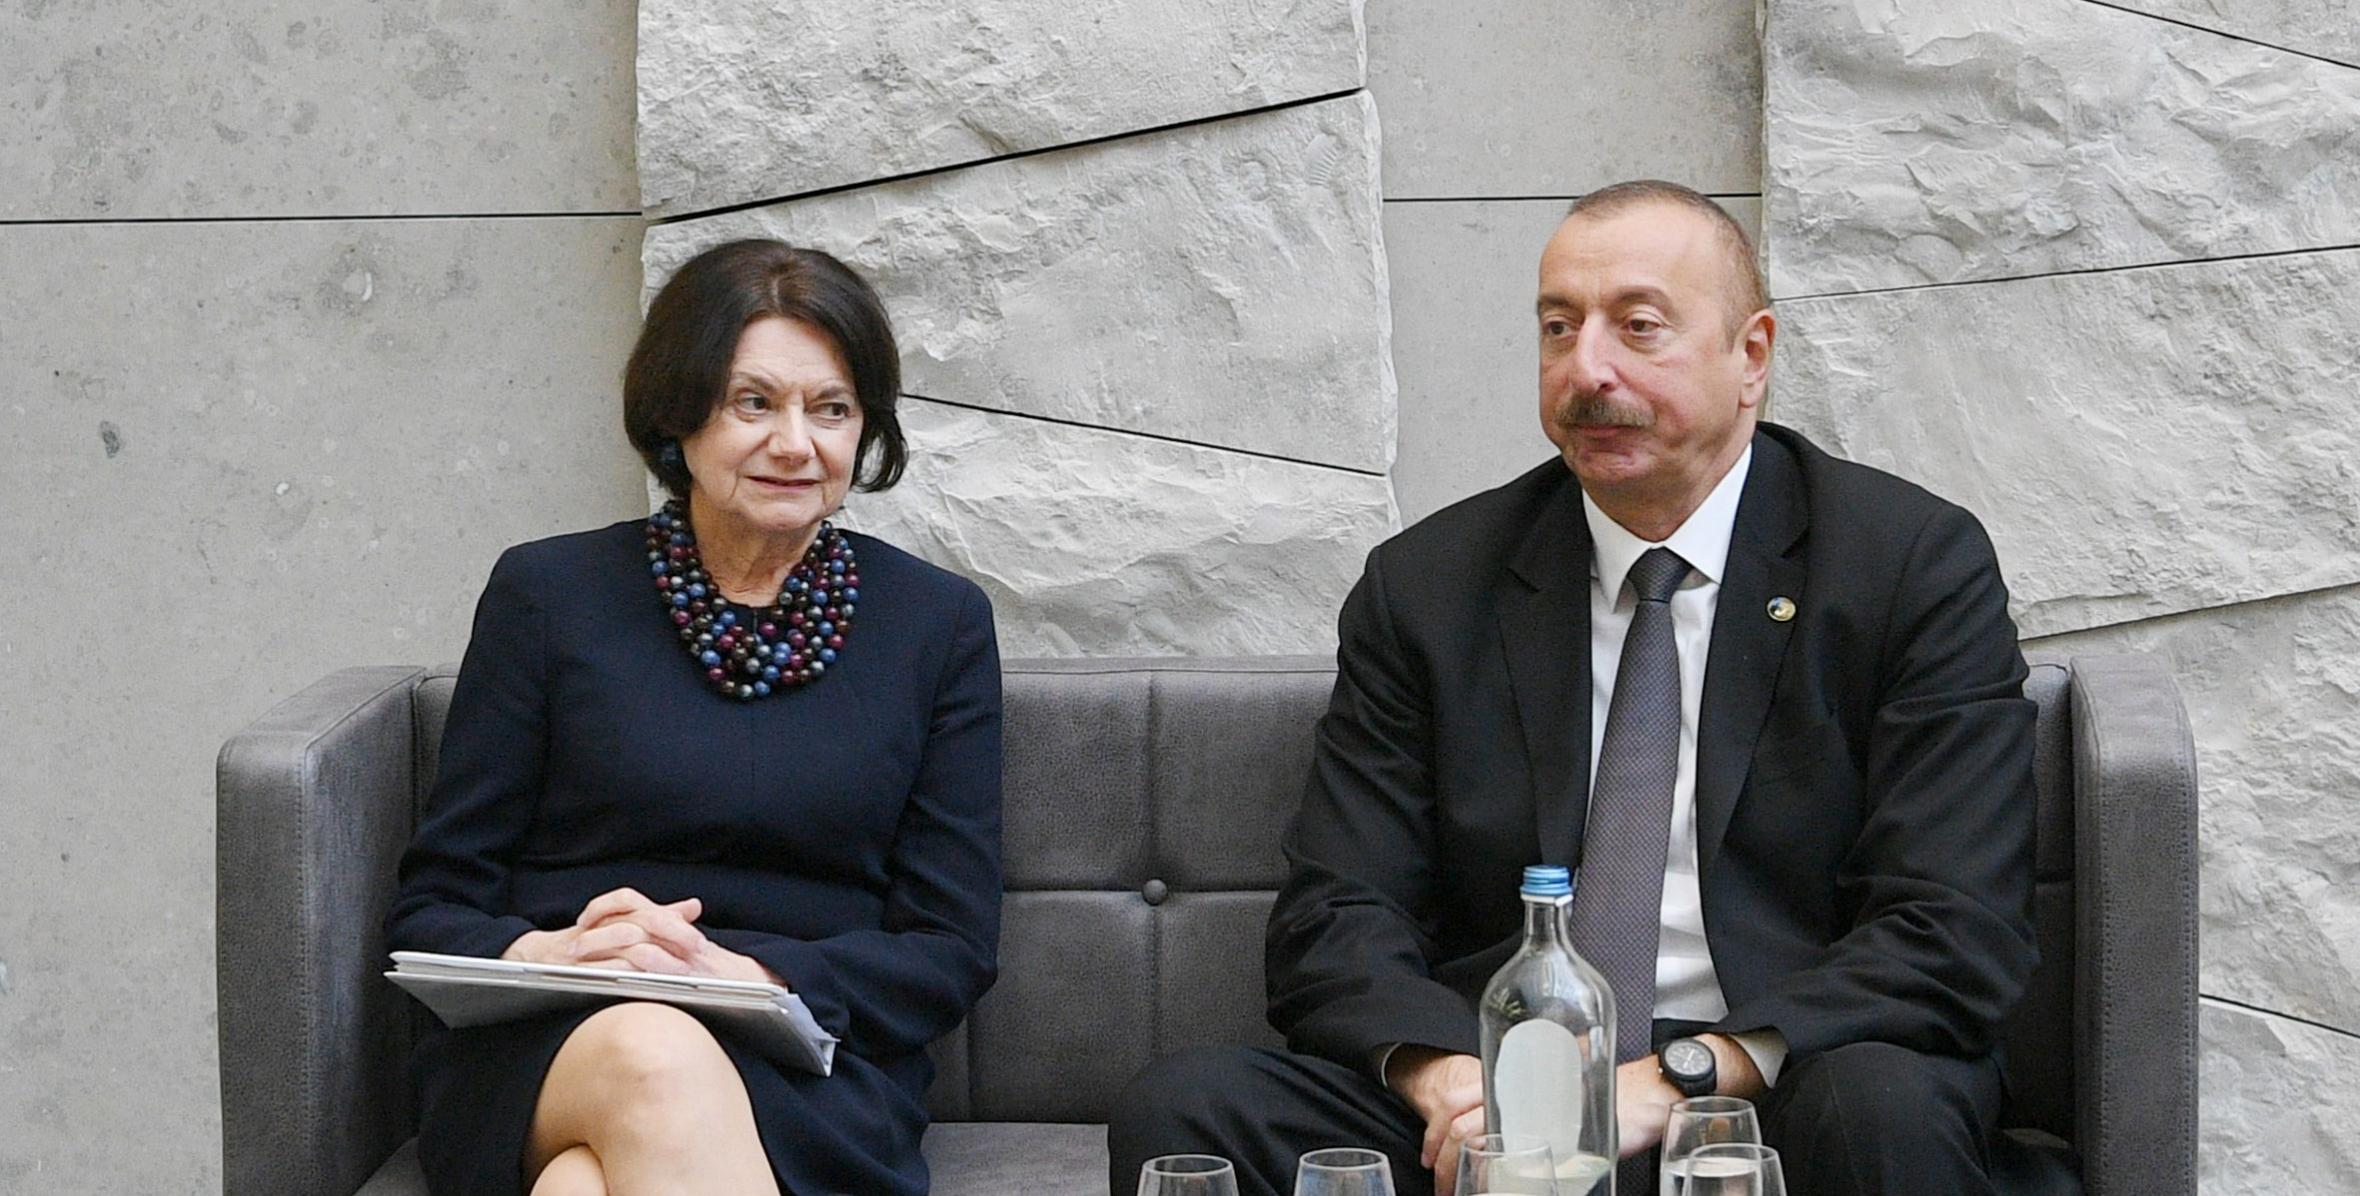 Ilham Aliyev met with UN Under-Secretary-General for Political Affairs in Brussels